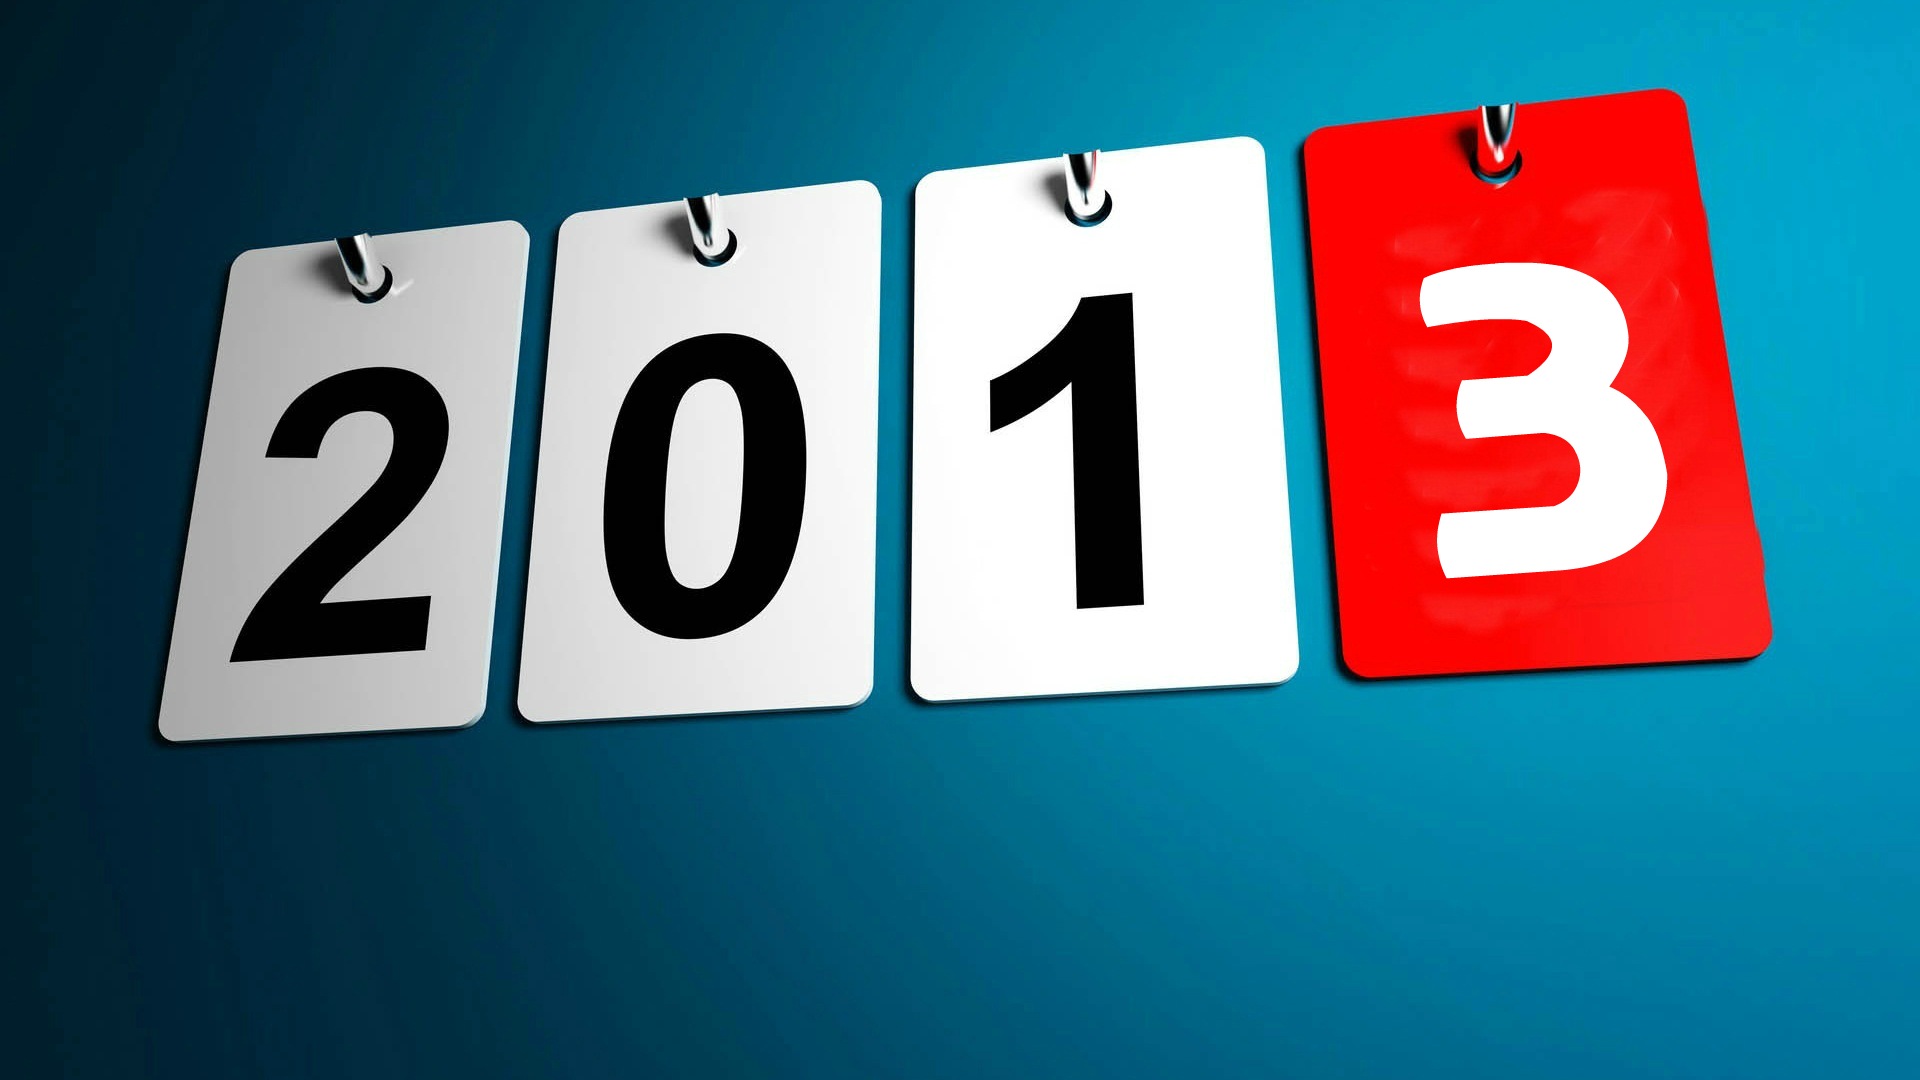 2013 Happy New Year HD wallpapers #20 - 1920x1080